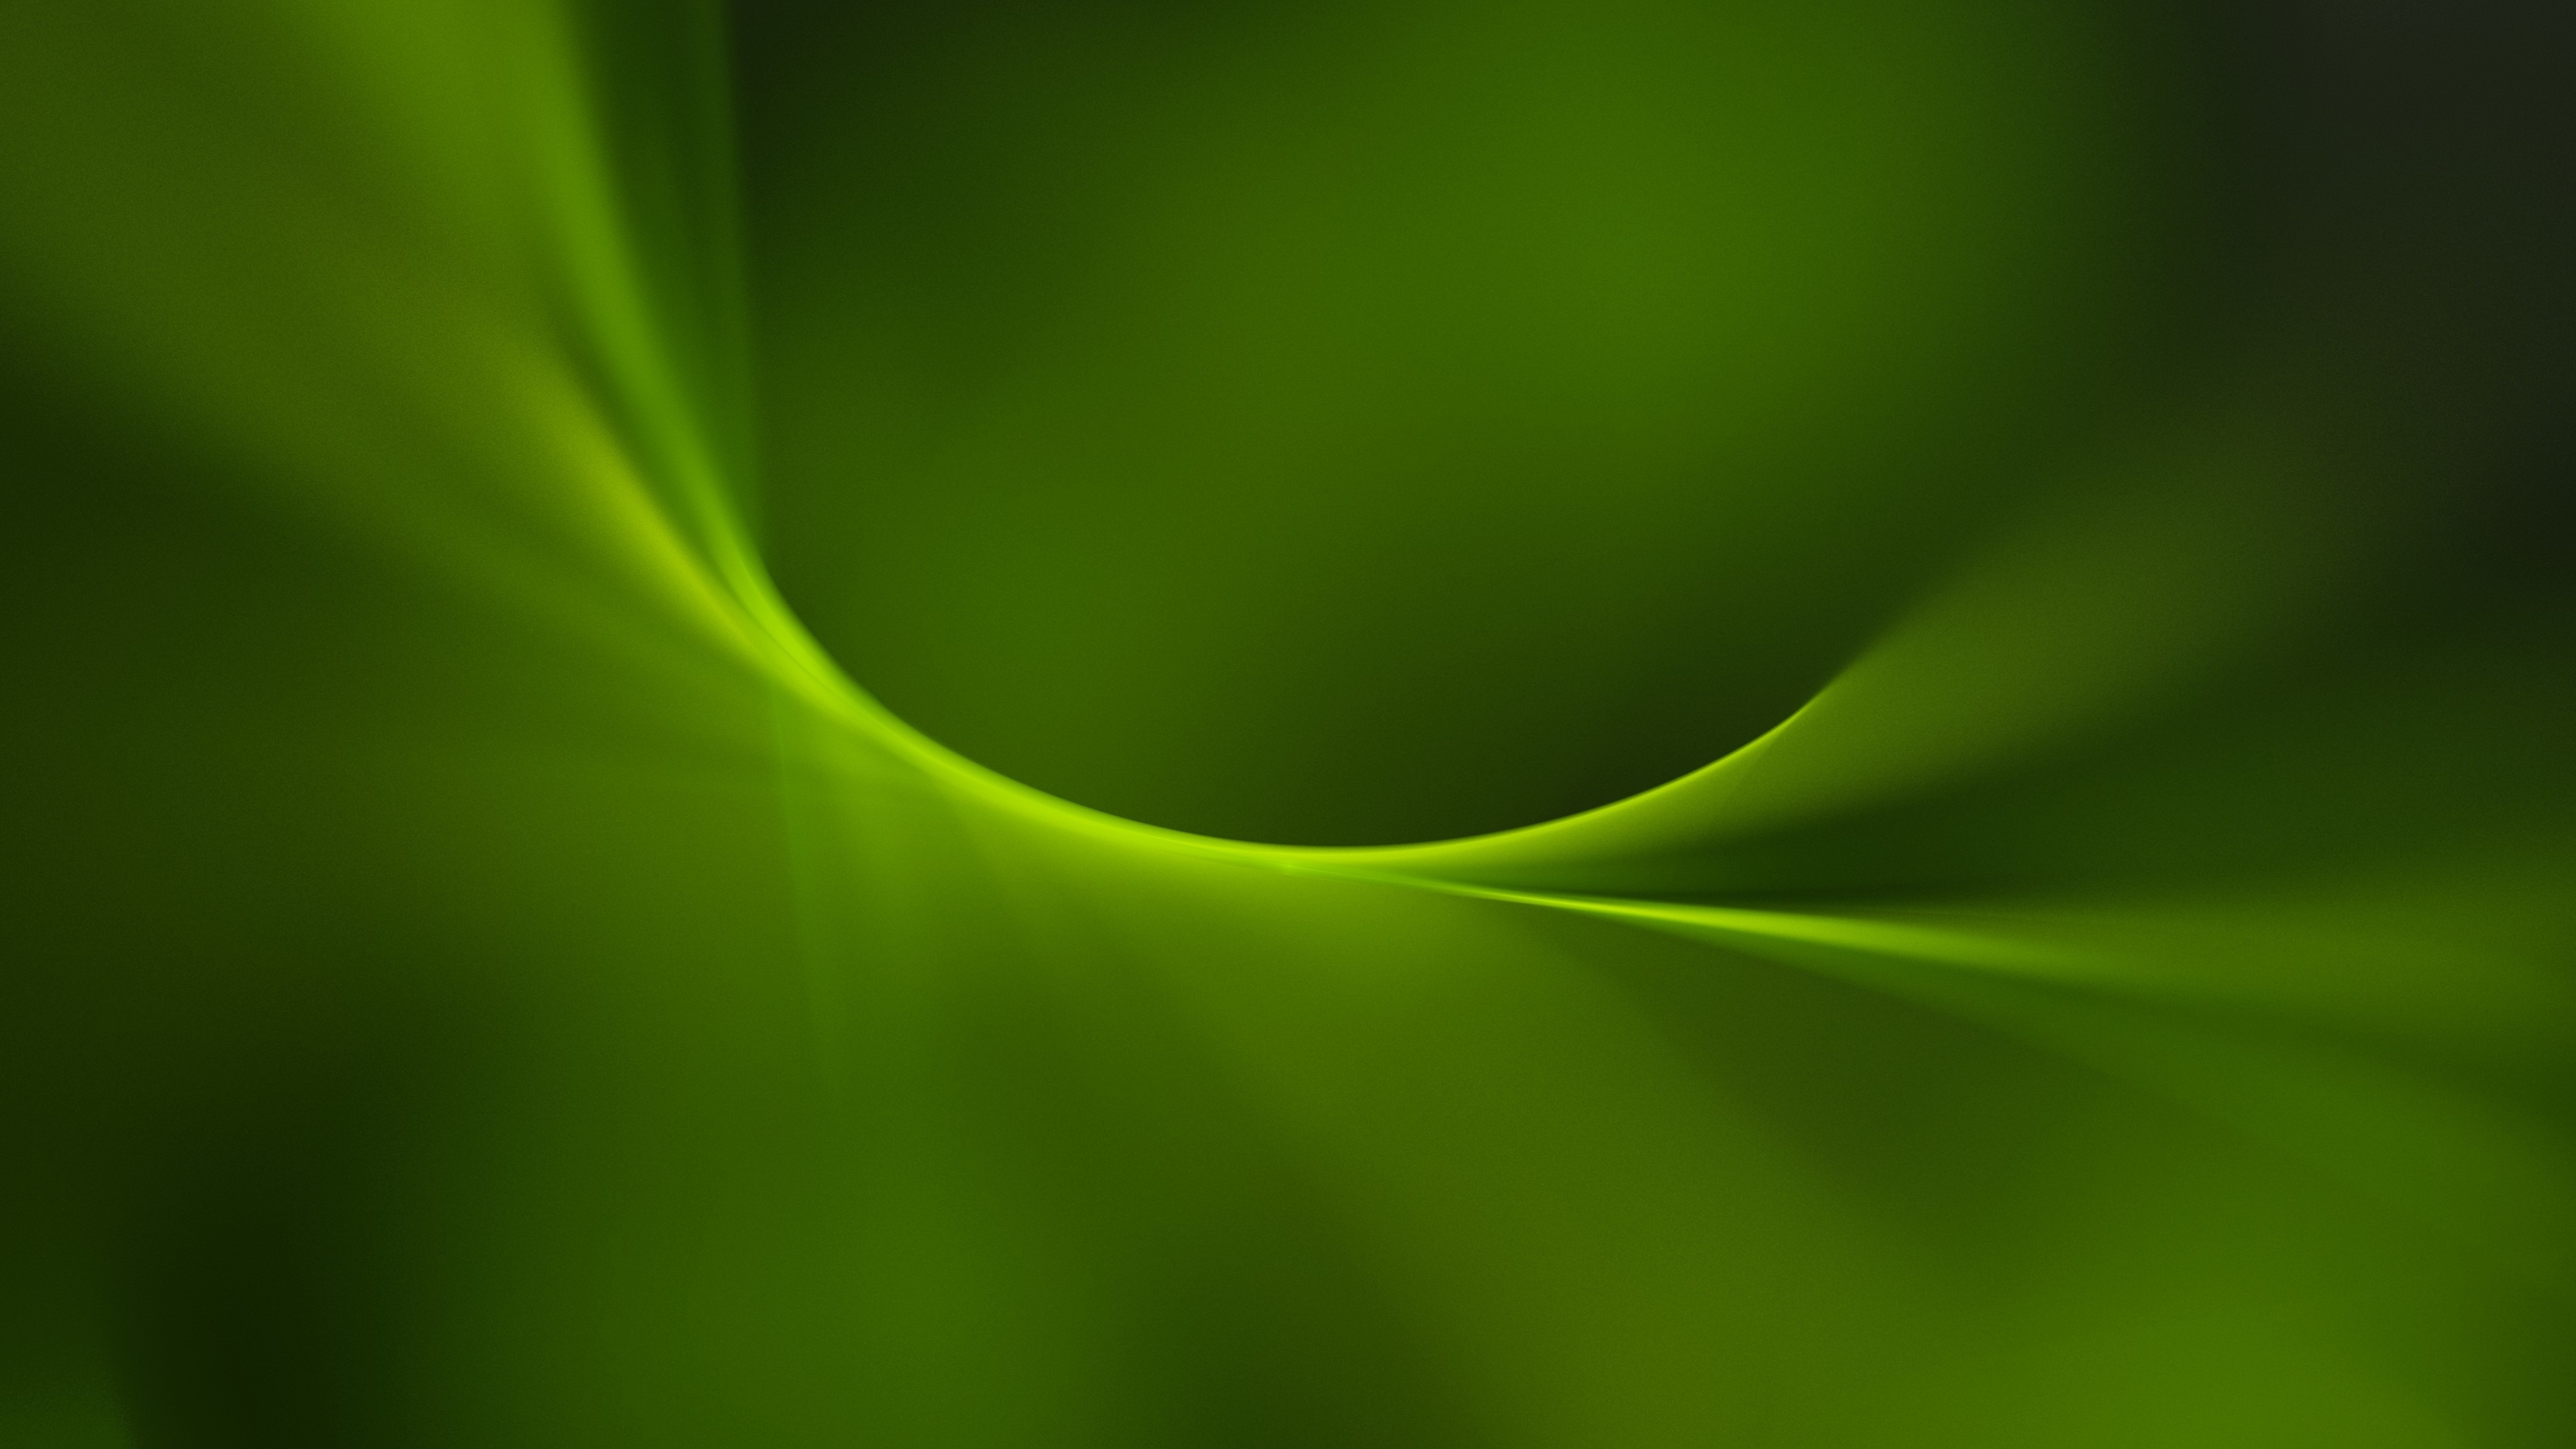 Simple Green Curves, Abstract, Wallpaper - Green Simple Background 4k - HD Wallpaper 